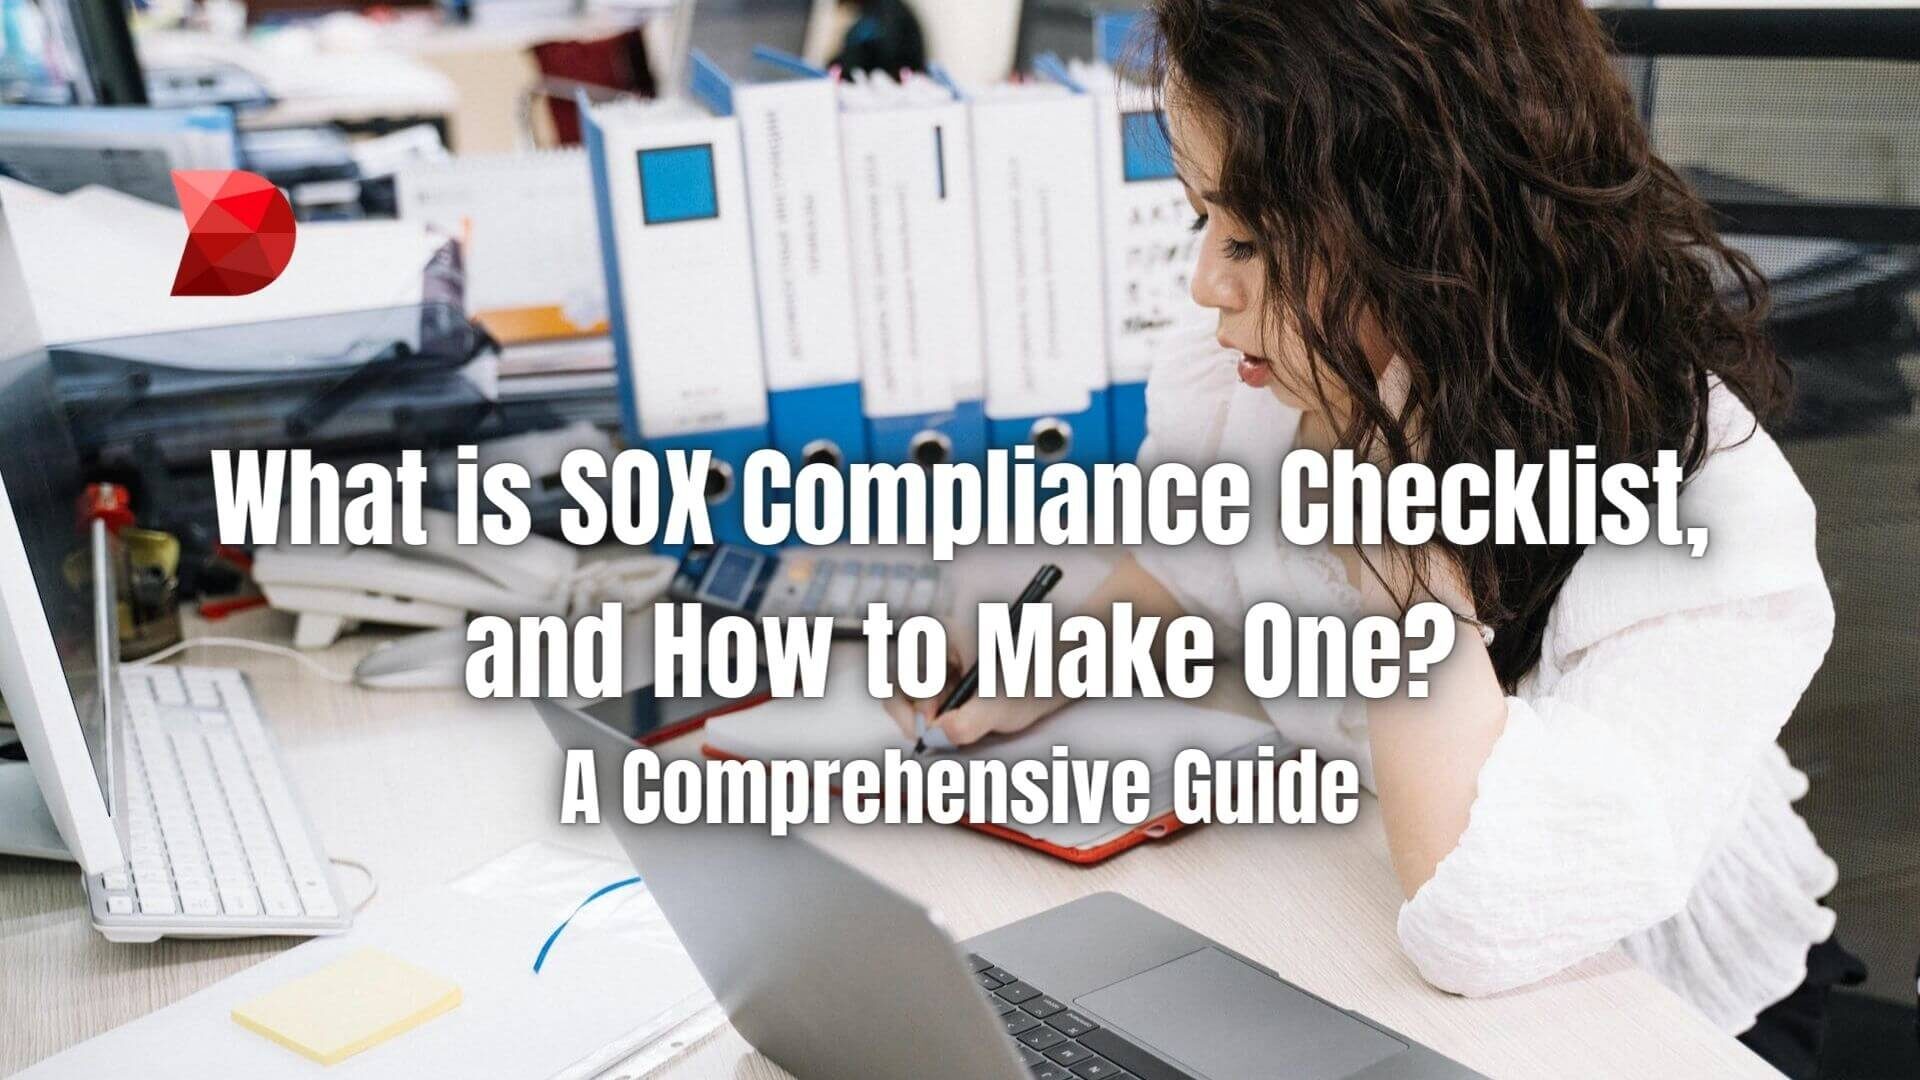 Ensure financial transparency! Click here to learn expert tips for creating a robust SOX compliance checklist for seamless adherence.